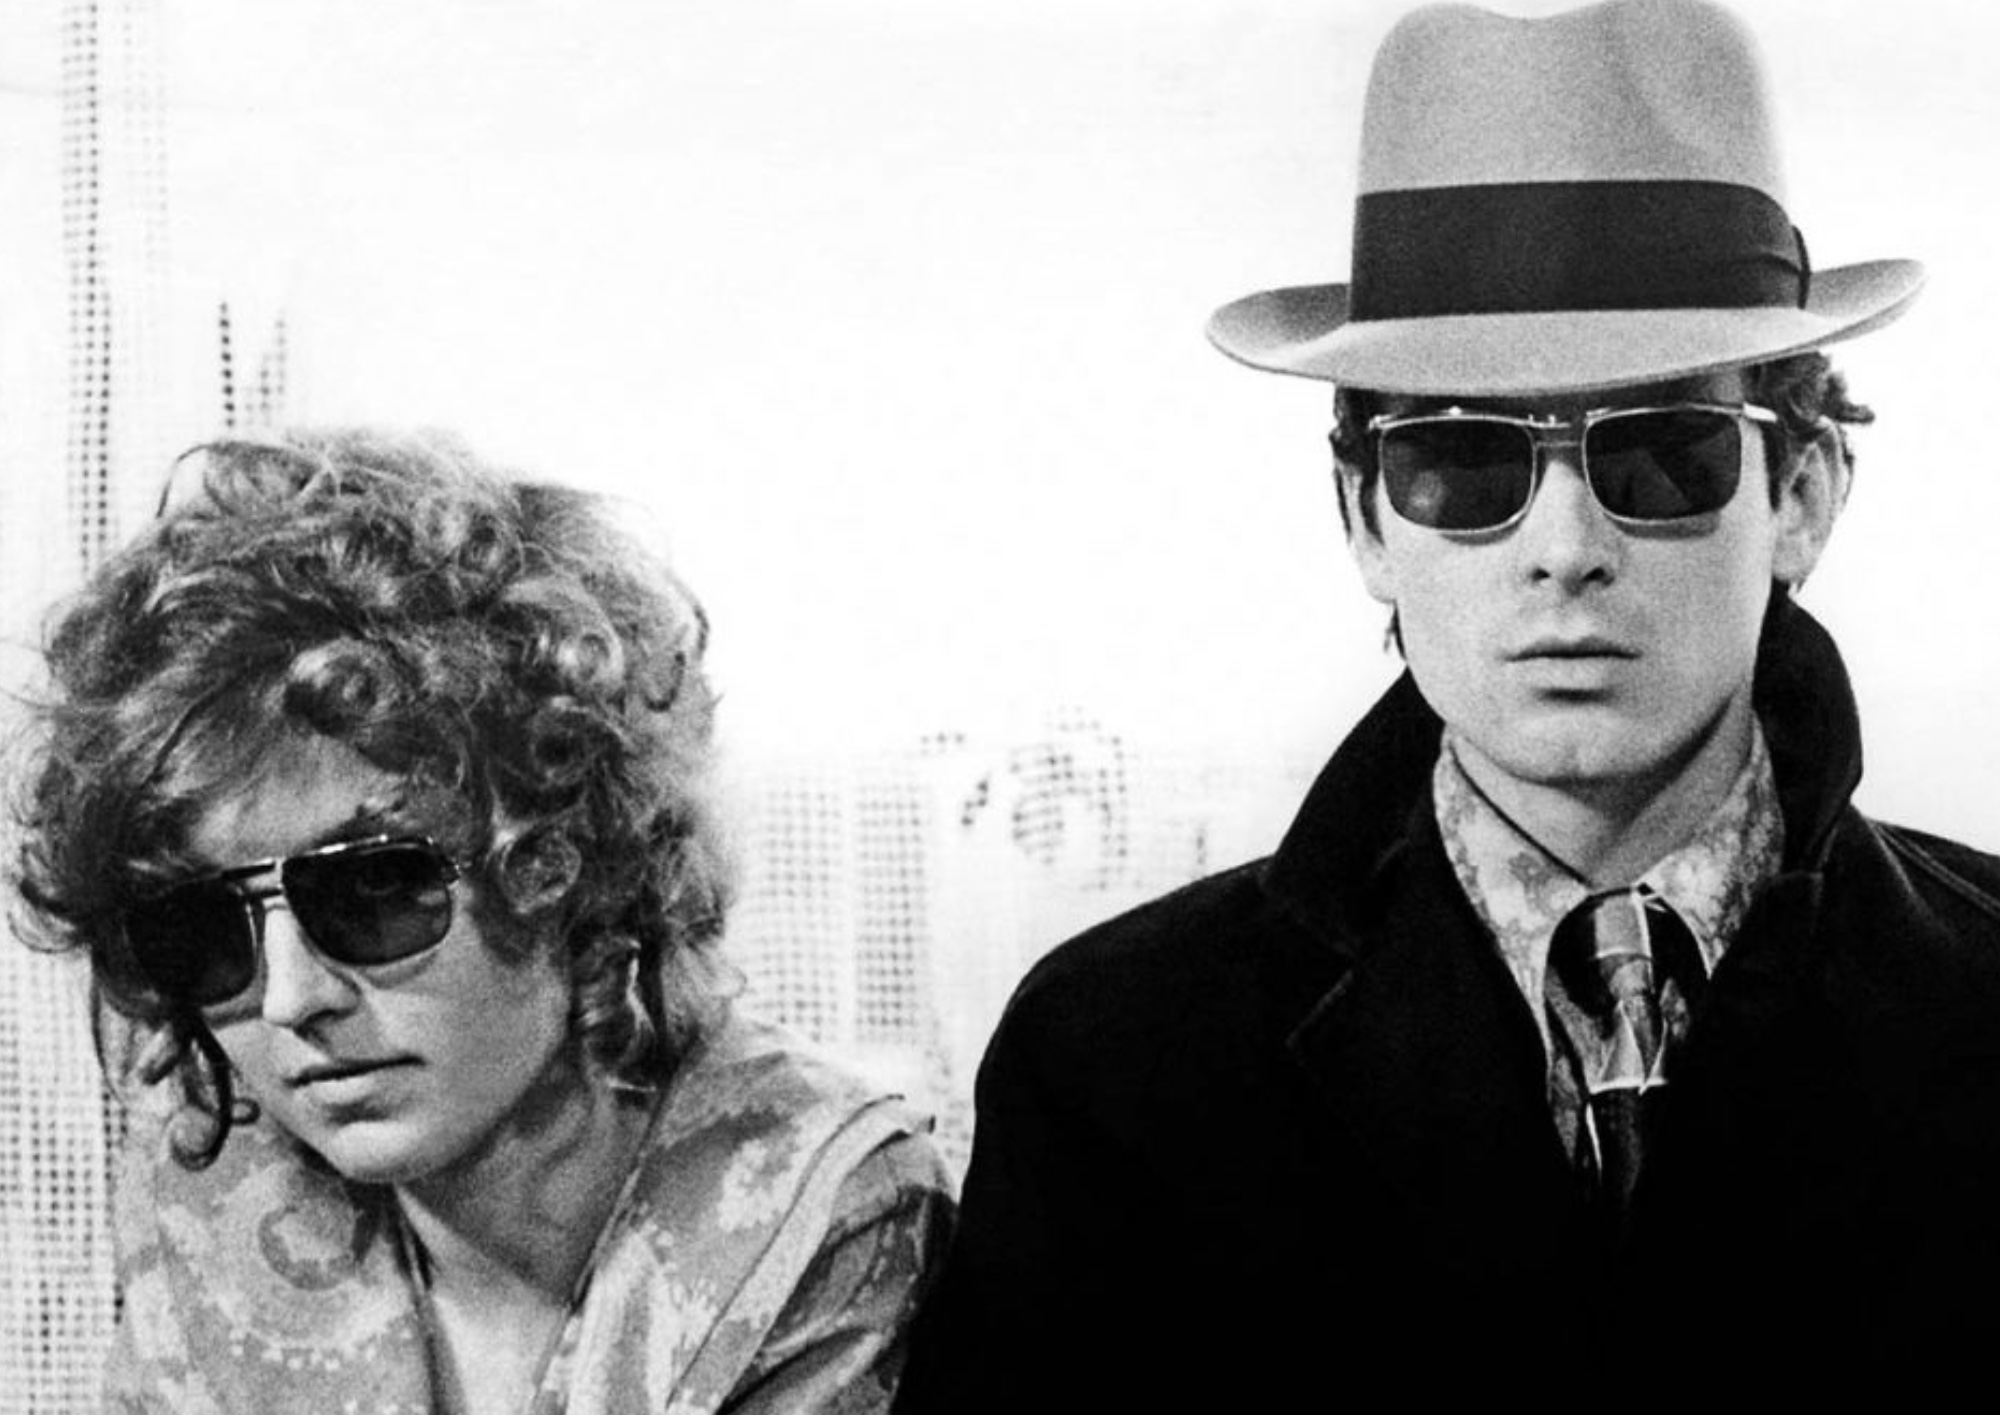 a black and white photograph of a man and a woman wearing disguises walking towards the camera . the skyline of a city is in the background